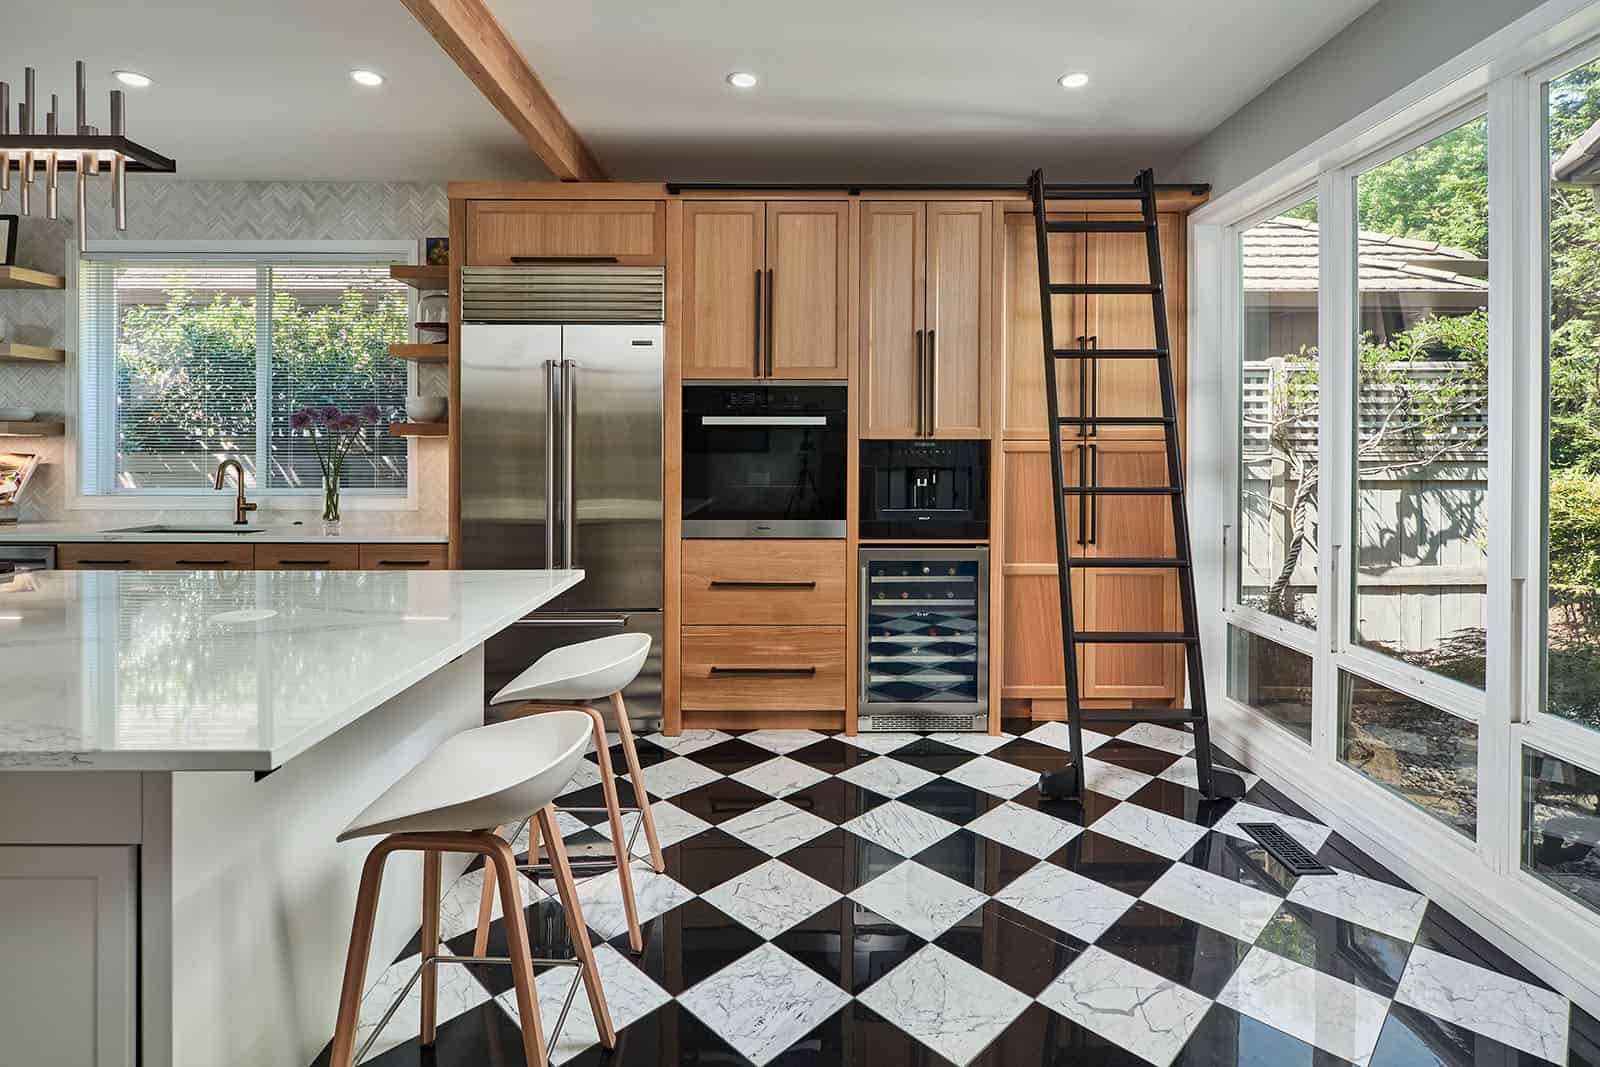 A kitchen with checkerboard tile floor